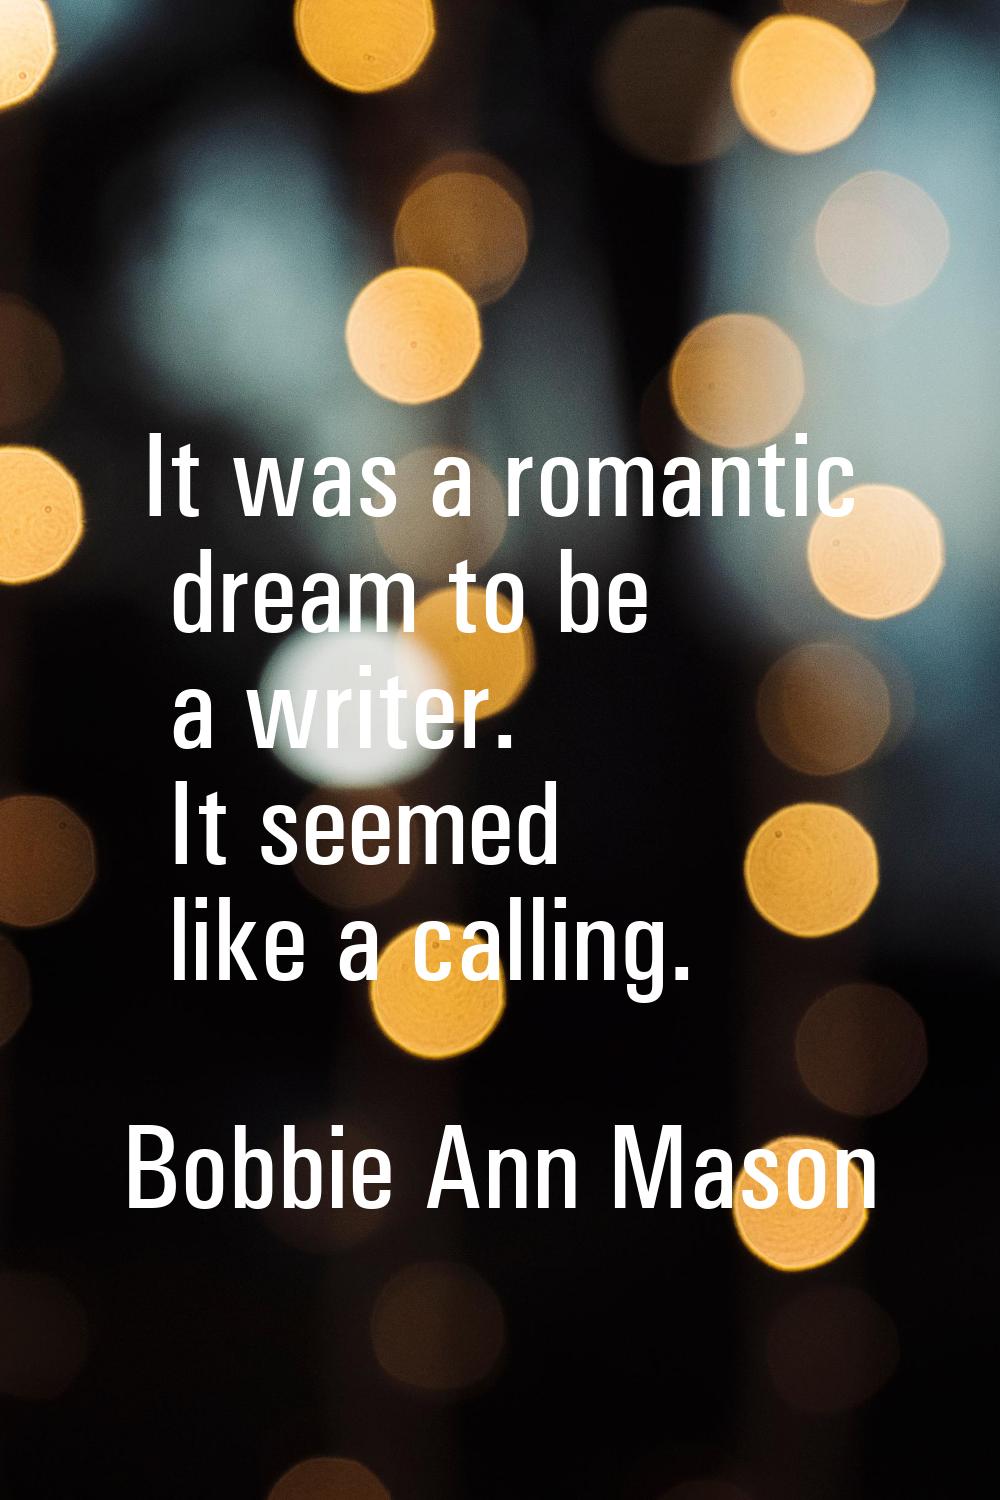 It was a romantic dream to be a writer. It seemed like a calling.